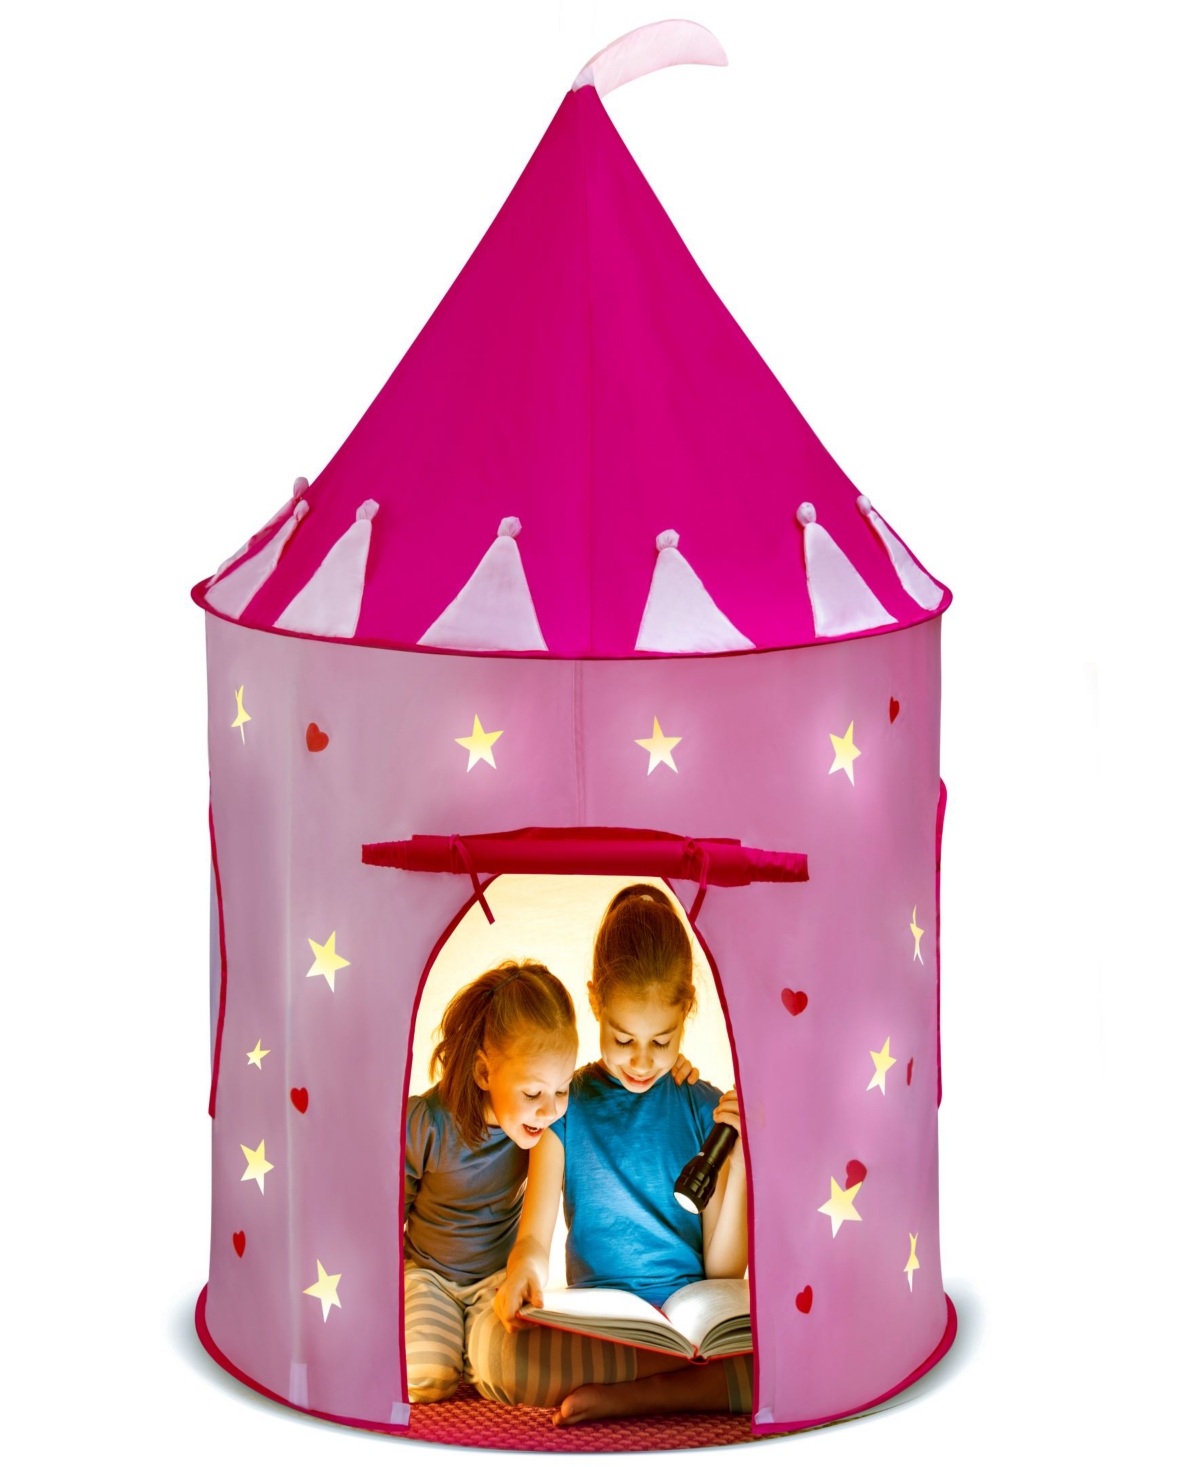 Play22 Babies' Foldable Princess Pink Castle Tent Glowing In The Dark In Multicolor